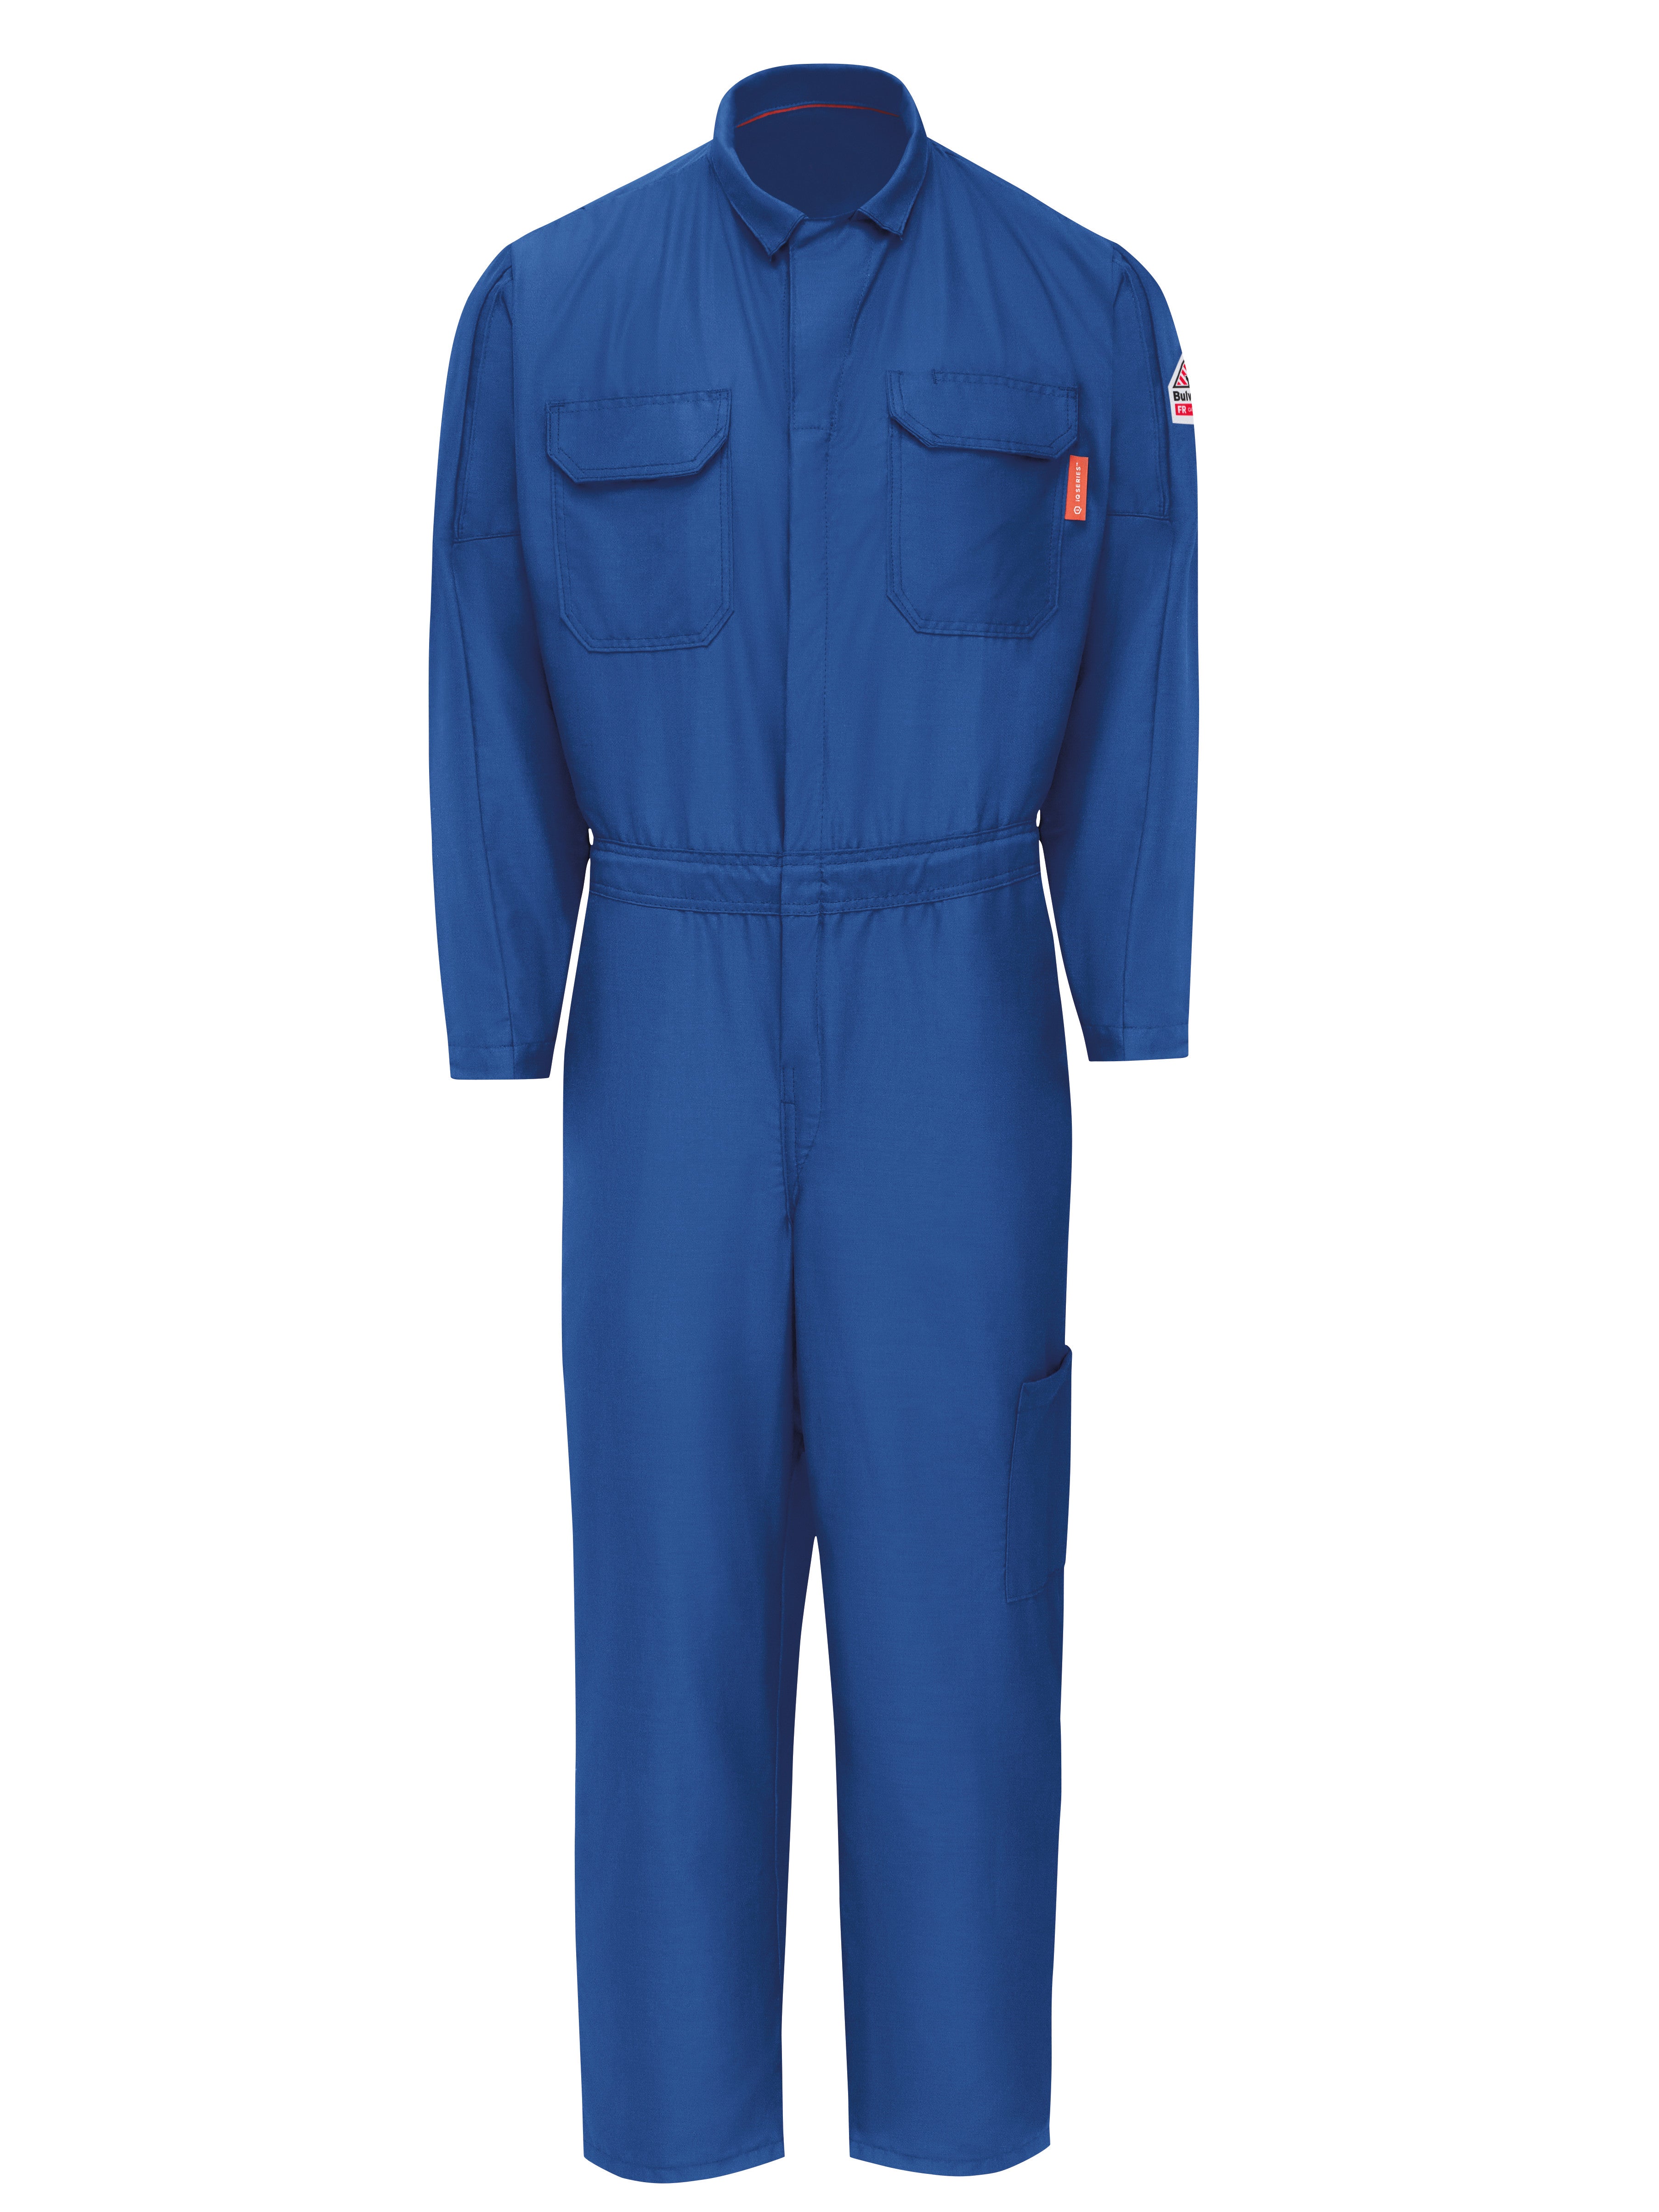 iQ Series® Men's Lightweight Mobility Coverall QC24 - Royal Blue-eSafety Supplies, Inc